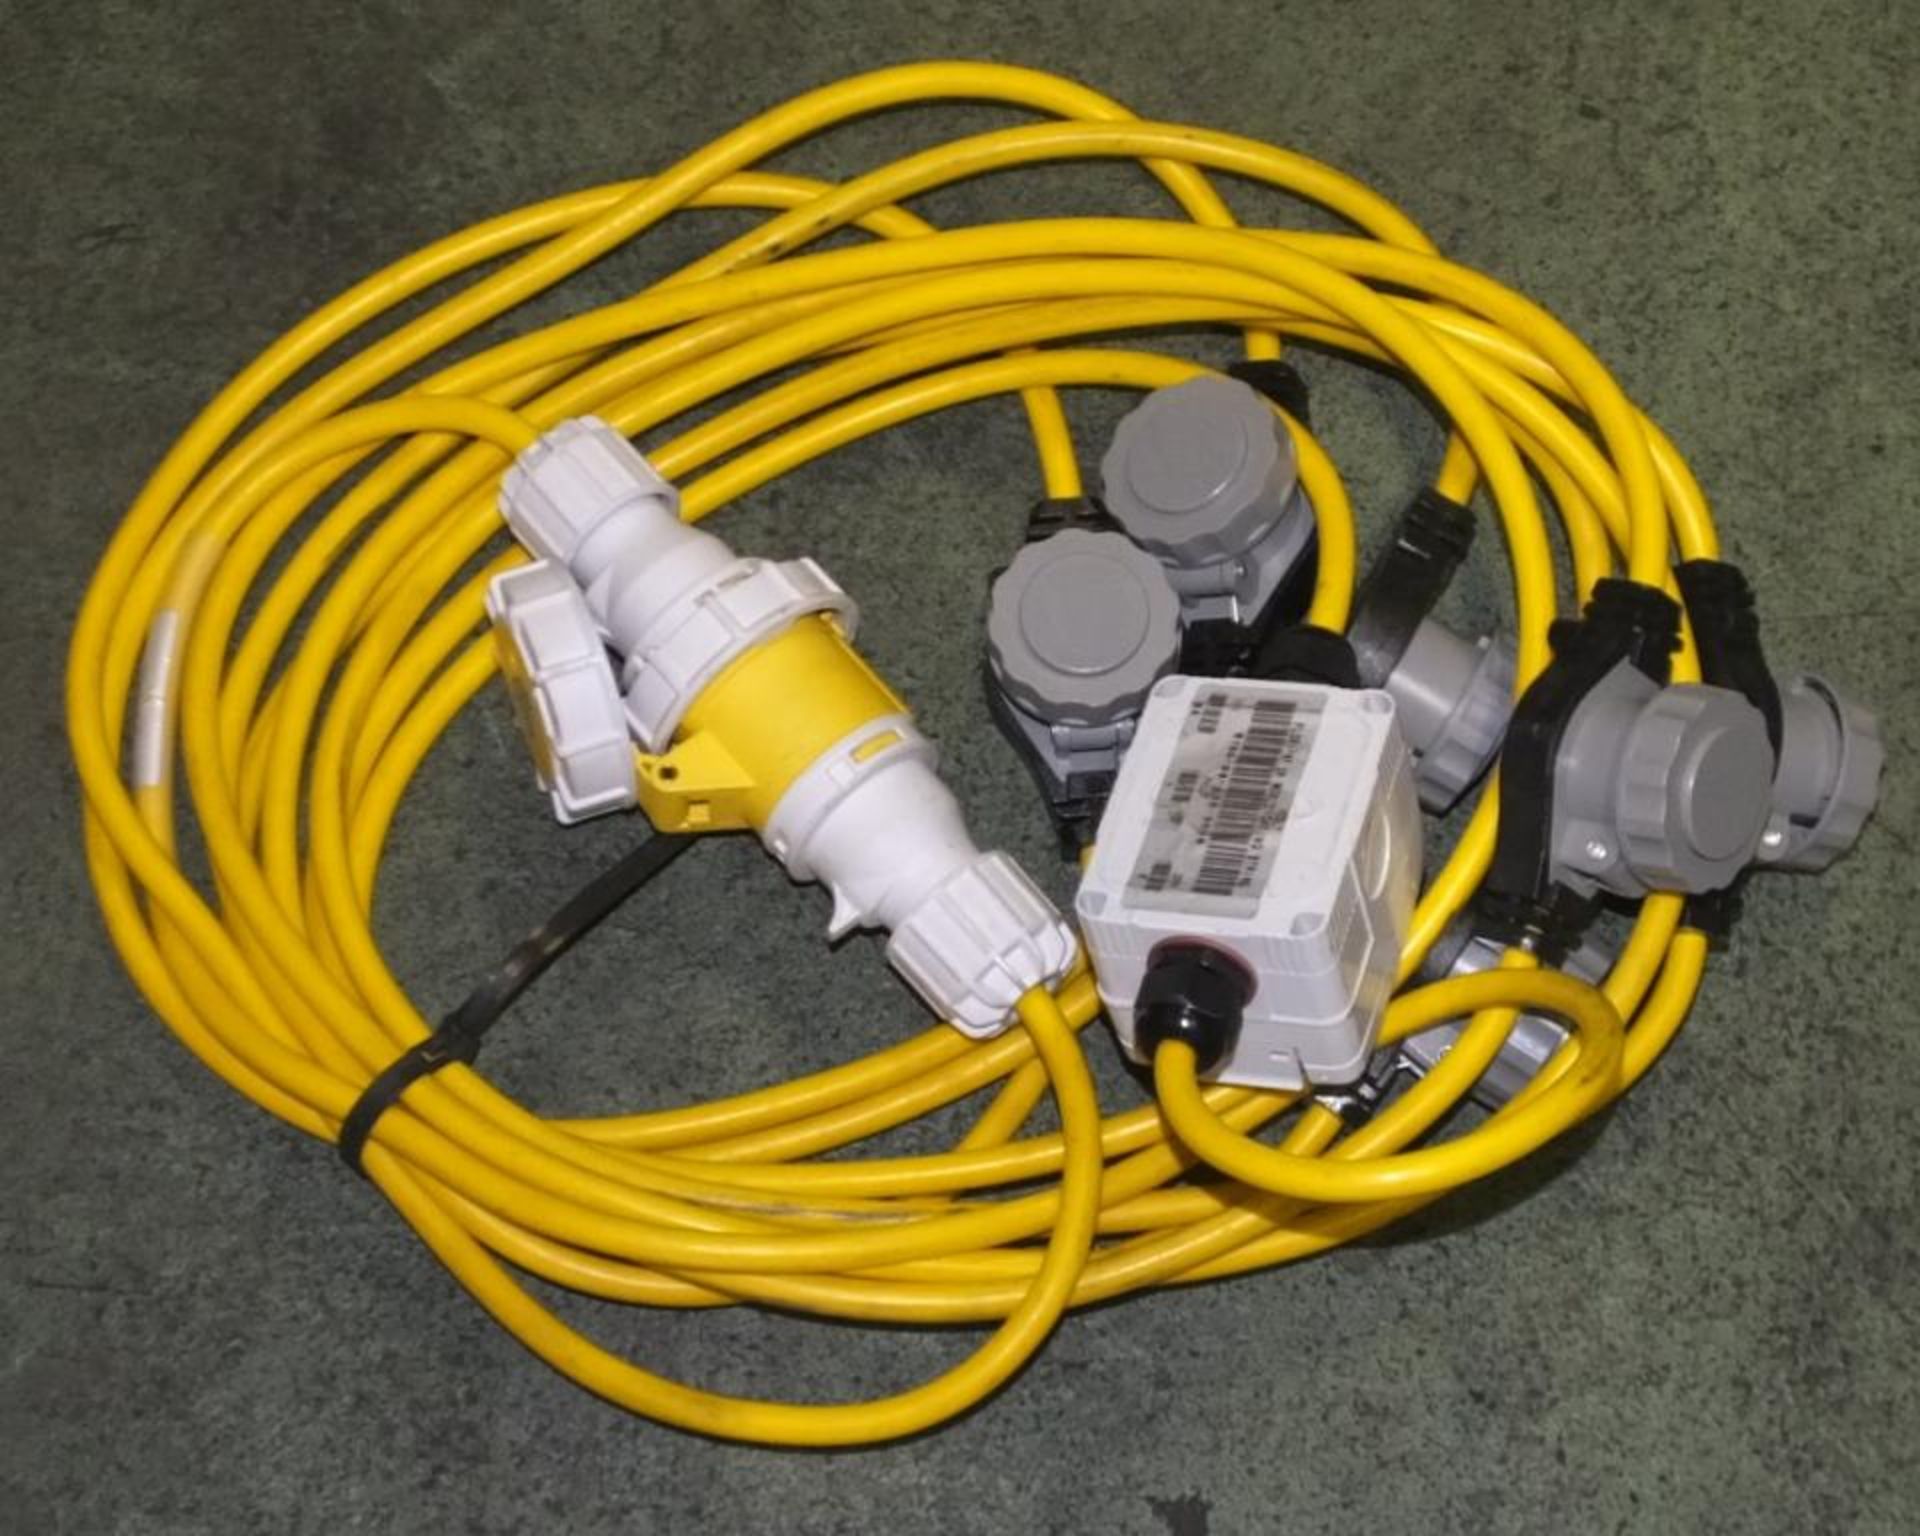 22x 110v Extension Lighting Cables With Switch - Image 2 of 2